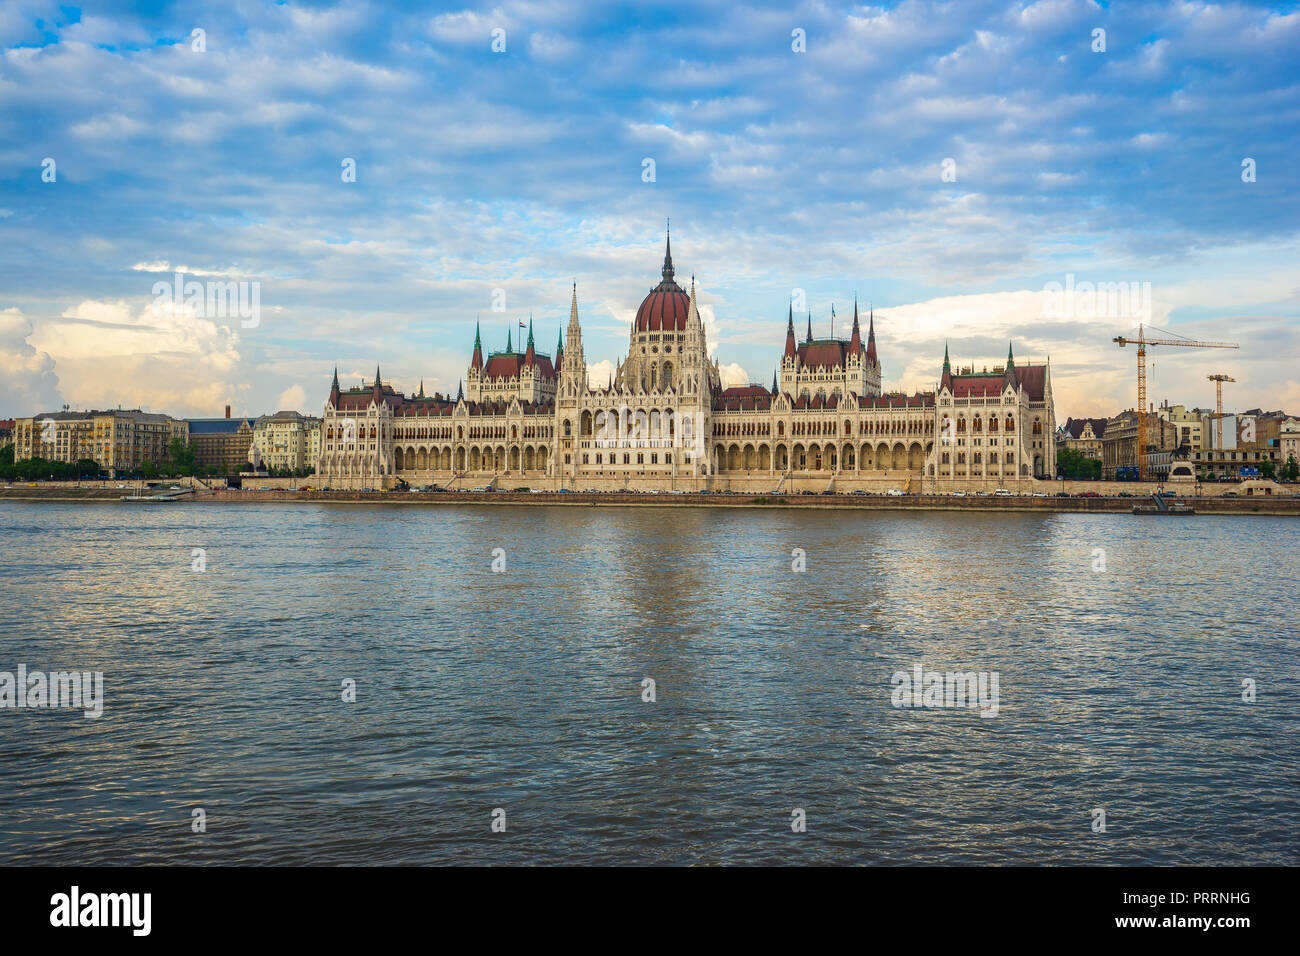 Budapest Parliament Building with view of Danube River in Hungary. Stock Photo